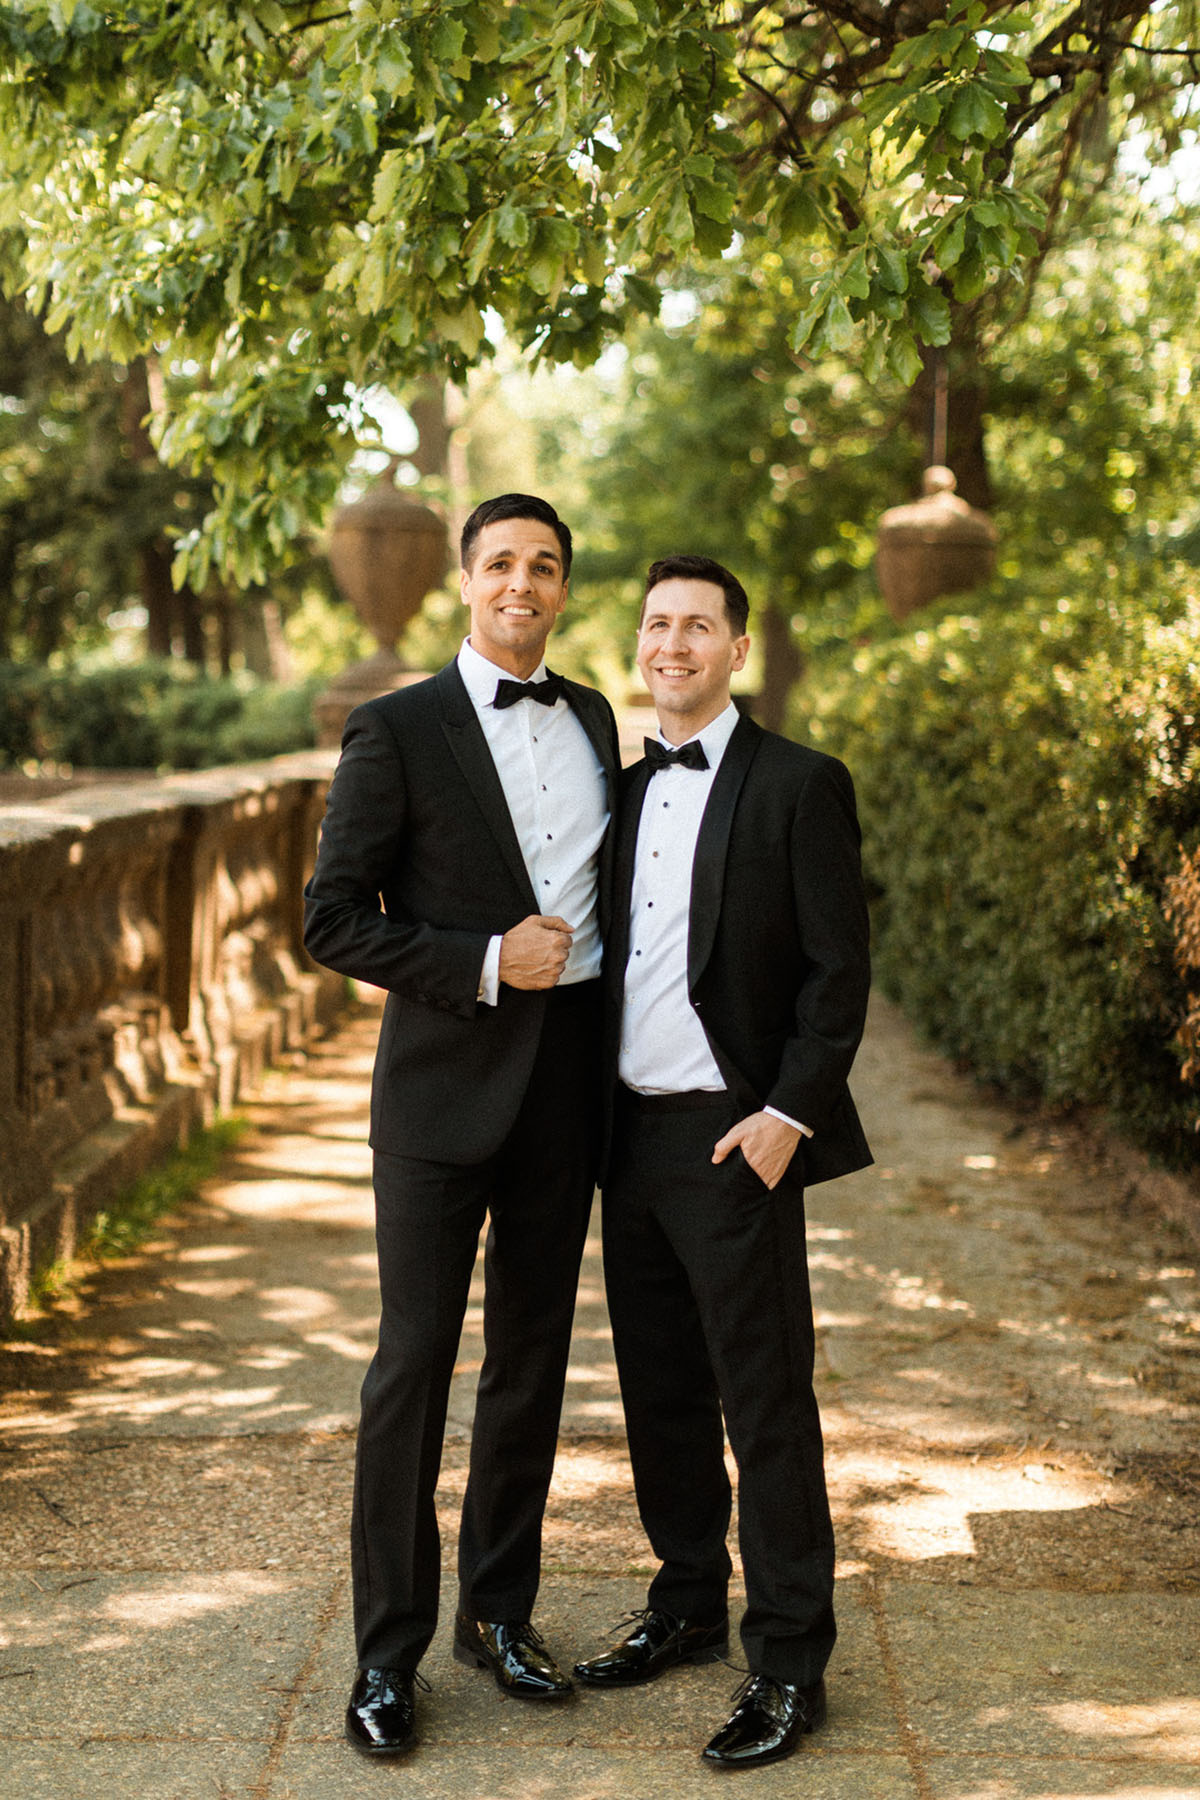 Energetic, colorful wedding in Washington, D.C. two grooms bow ties black tuxedos